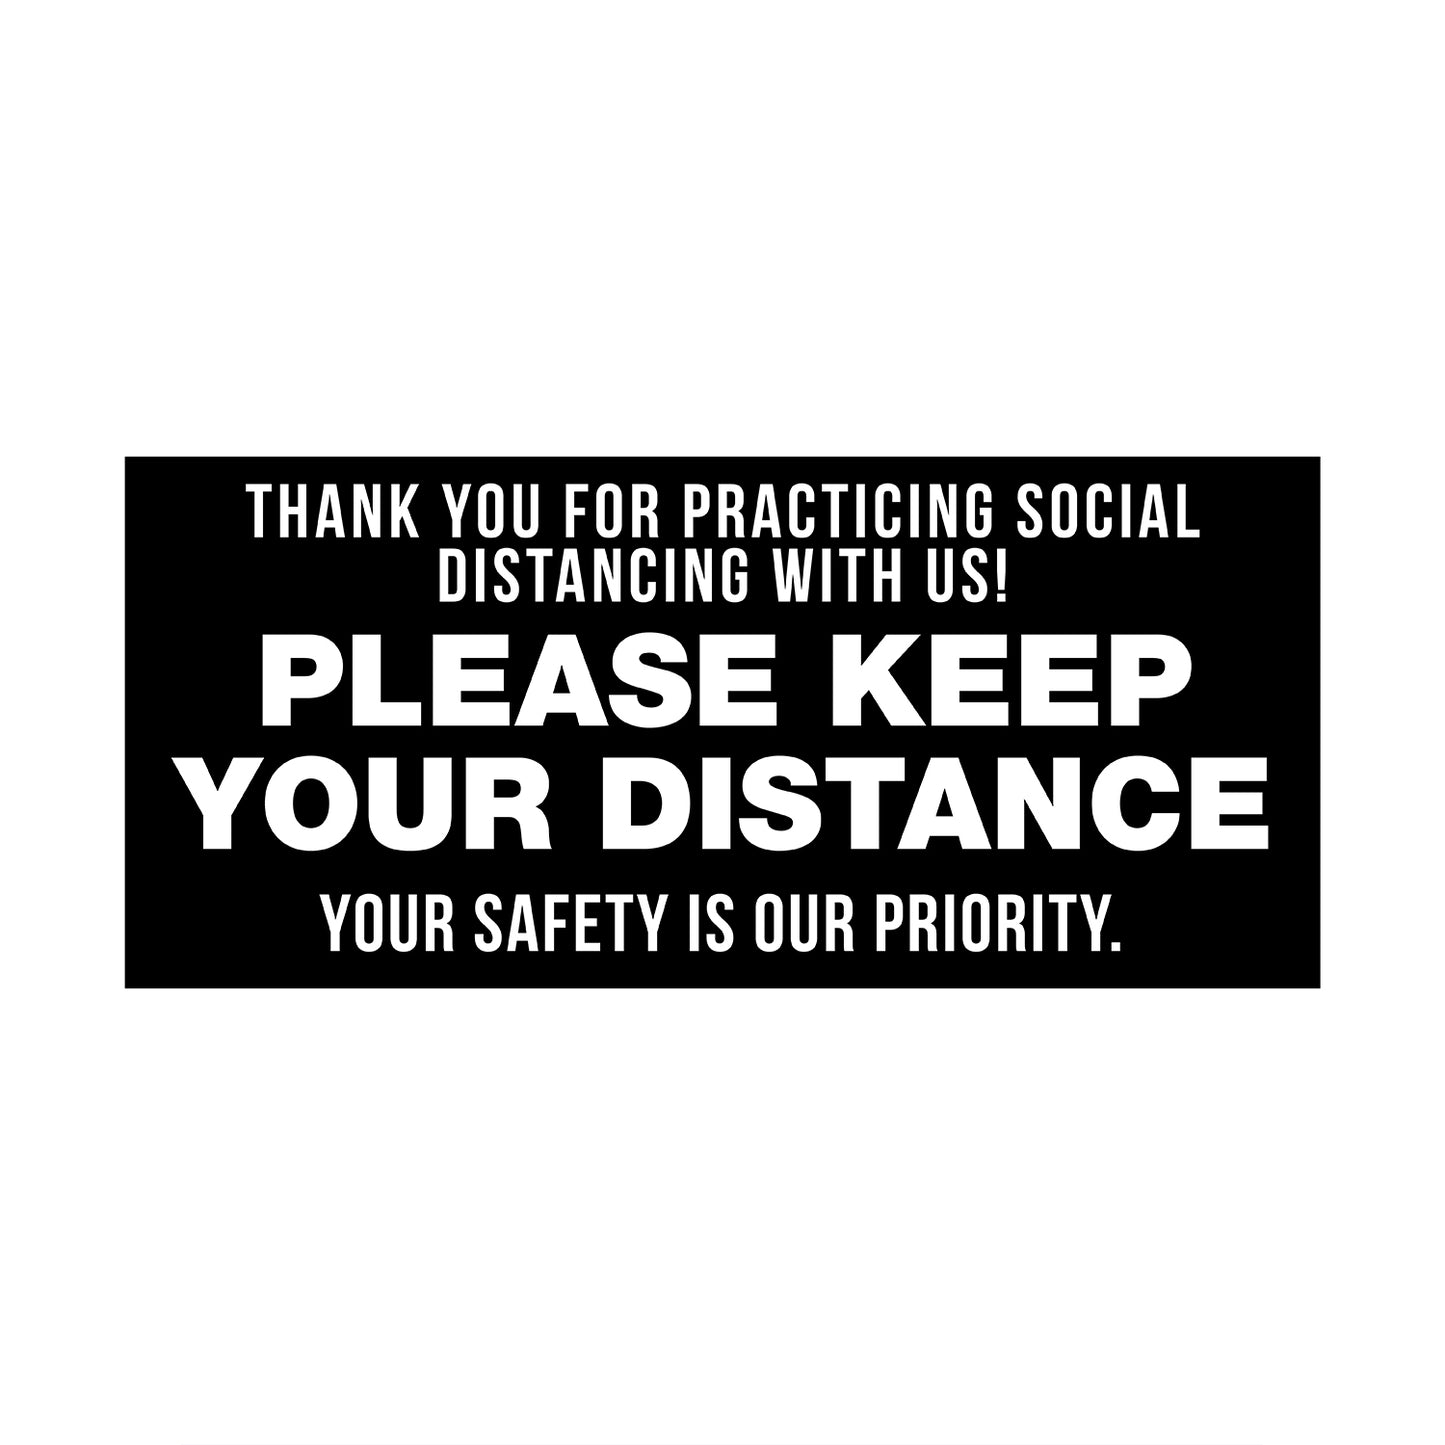 Keep your distance poster decal